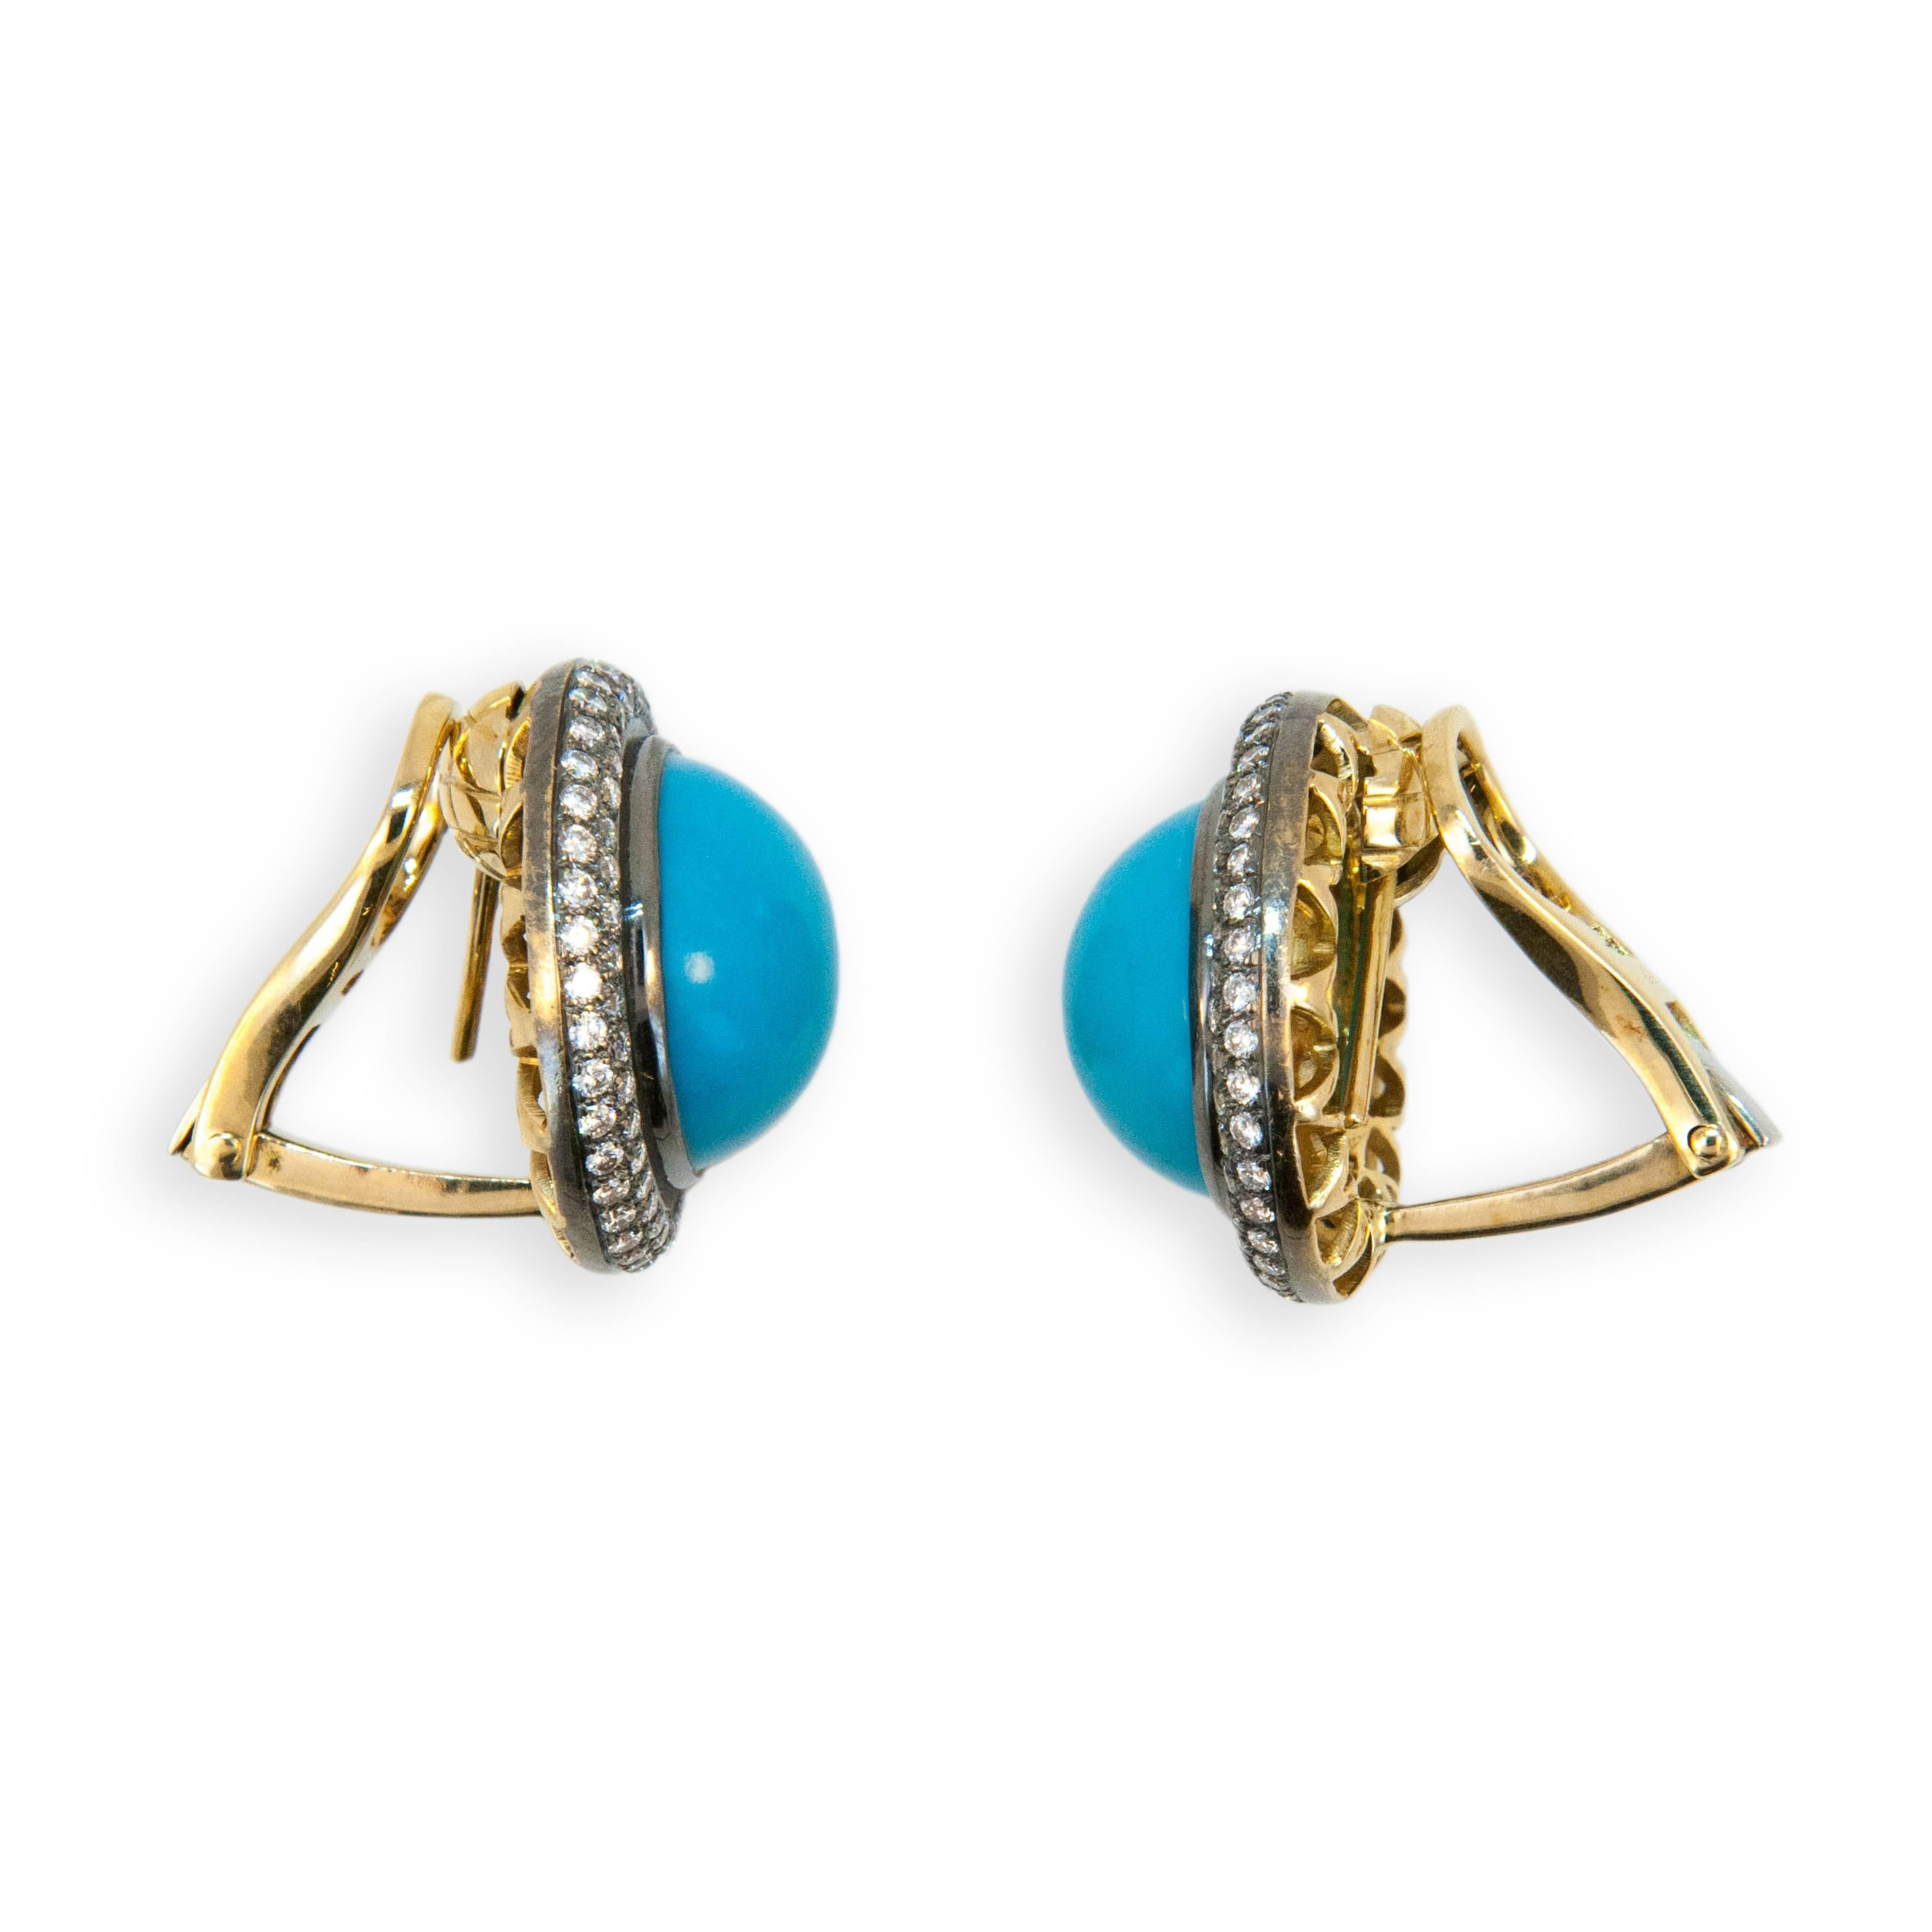 18 karat yellow blackened gold turquoise and diamond earrings. Turquoise approximately 21.29 carats total weight. Diamonds approx. 1.59 carats total weight. Turquoise approximately 15 mm in diameter. Earrings can be worn as pierced or clip on posts